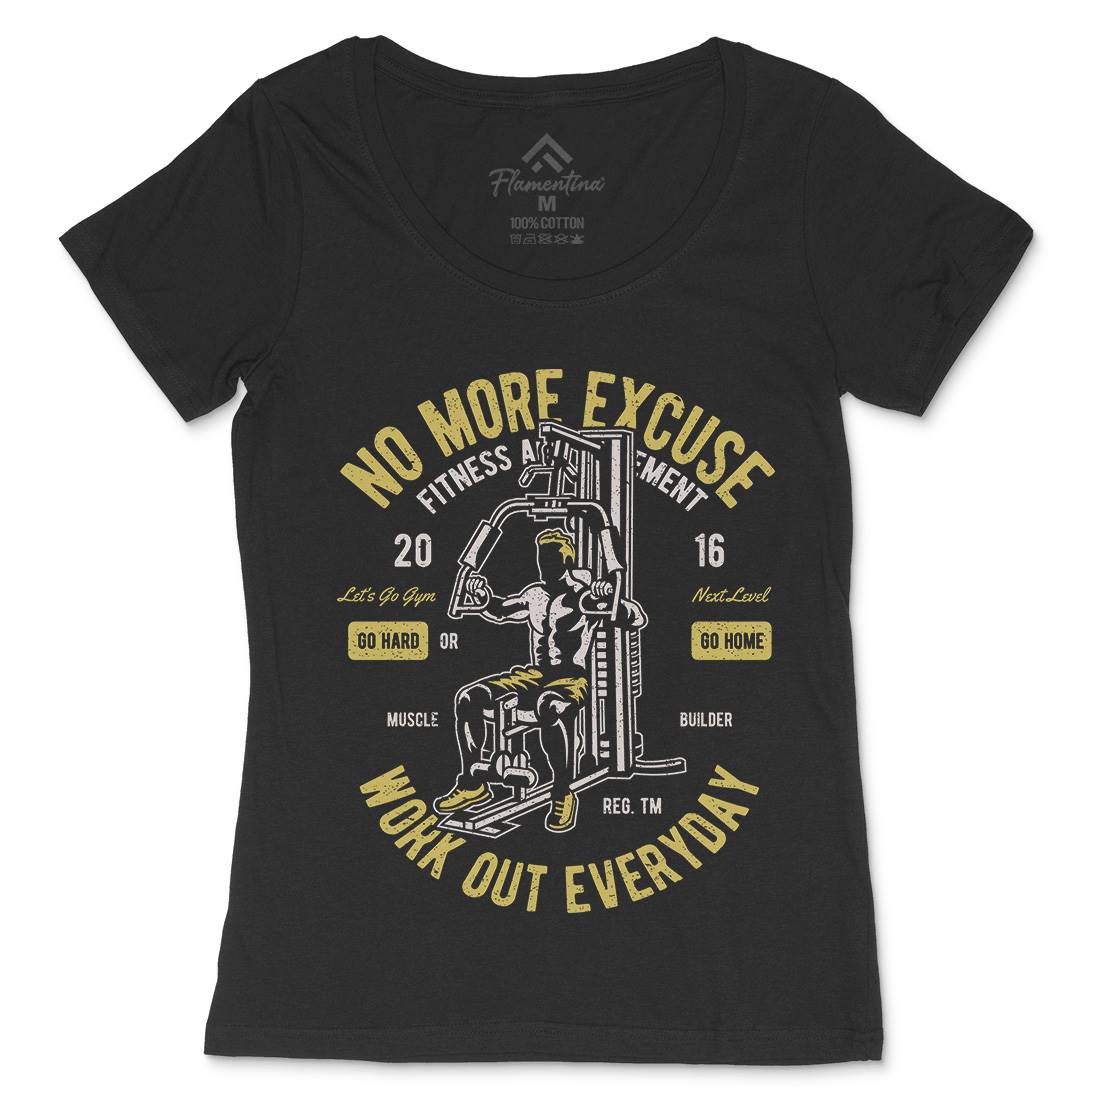 Work Out Everyday Womens Scoop Neck T-Shirt Gym A198